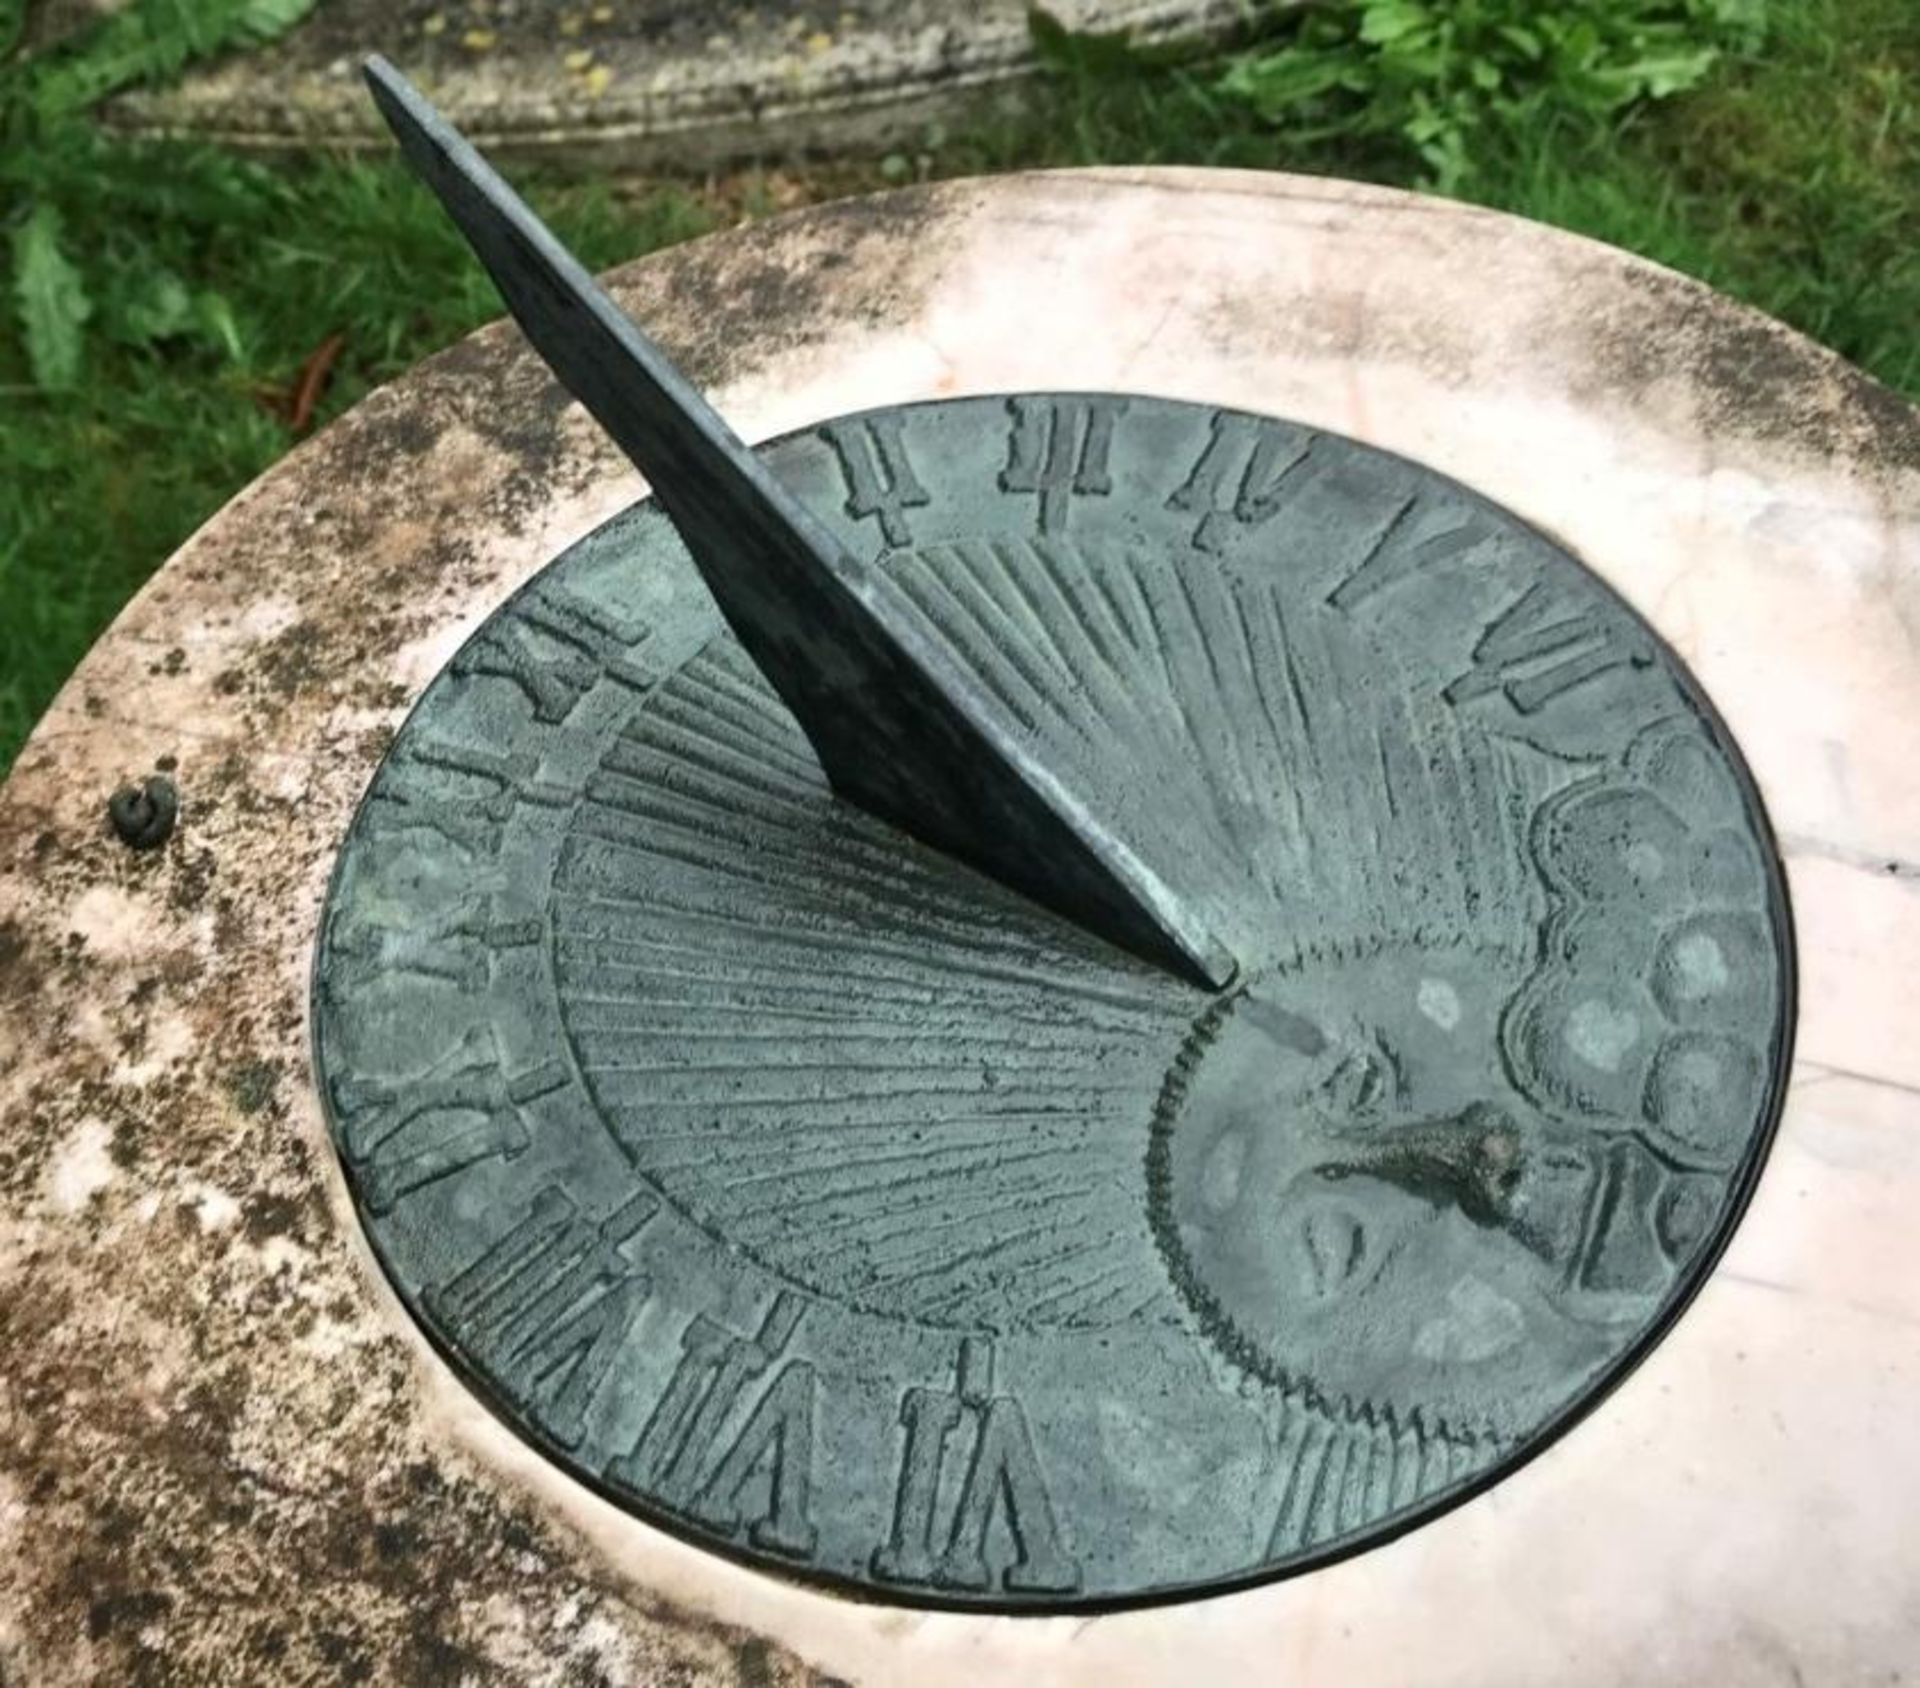 1 x Solstice Stone Sundial Shaped Pedestal With Dial Plate - Measurements Height 84cm x Diameter - Image 4 of 8